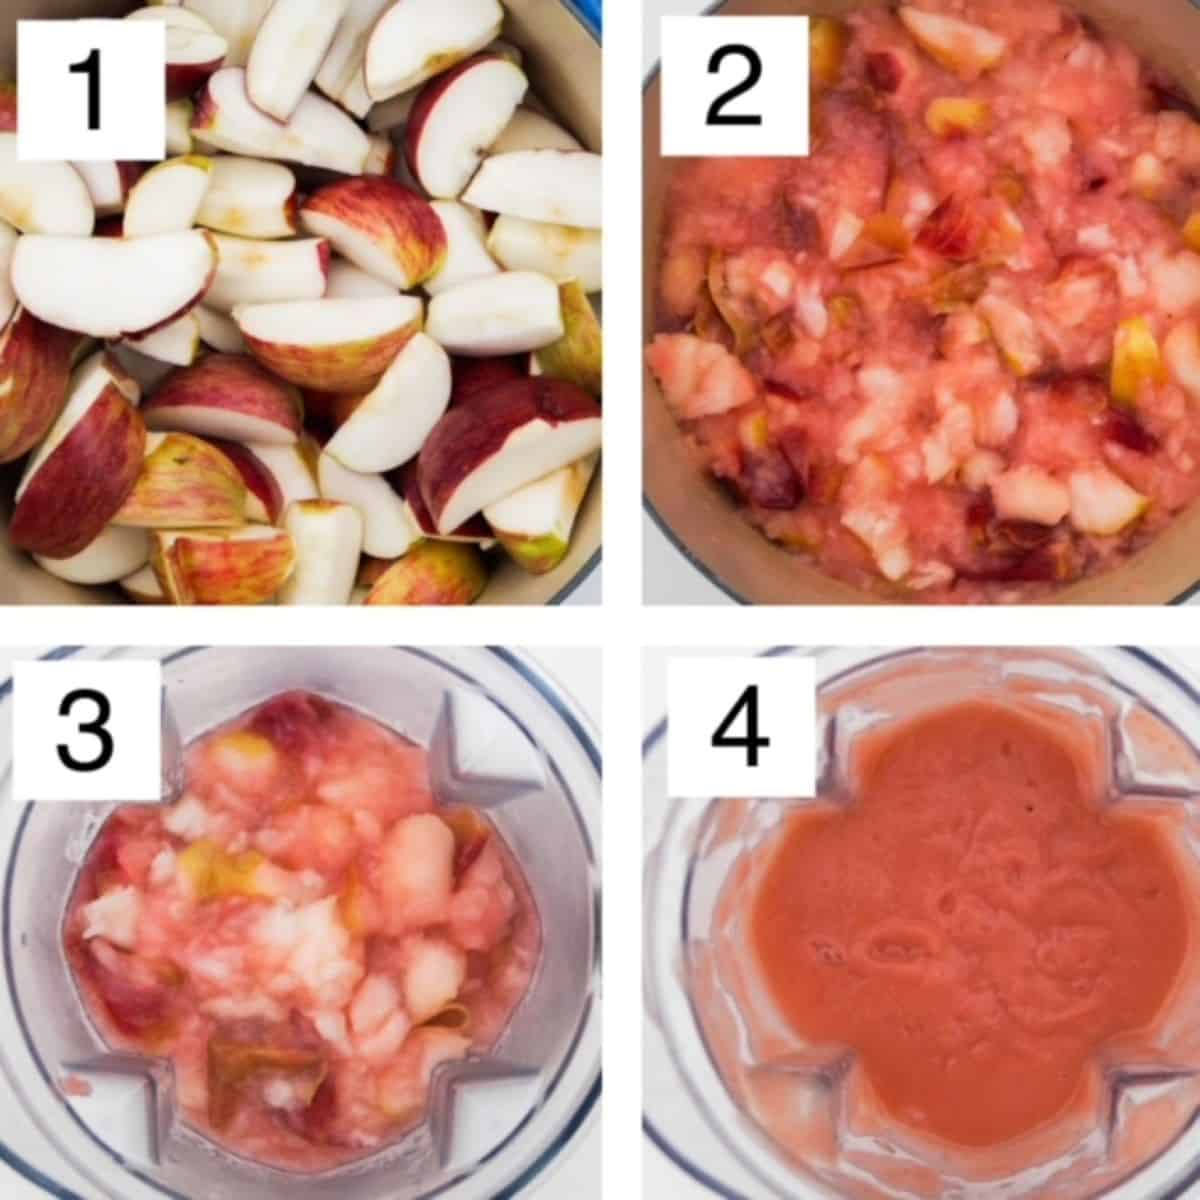 Four step by step images in a collage: sliced apples, cooked apples in a Dutch oven, cooked apples in a Vitamix blender, and pink applesauce in a Vitamix blender.